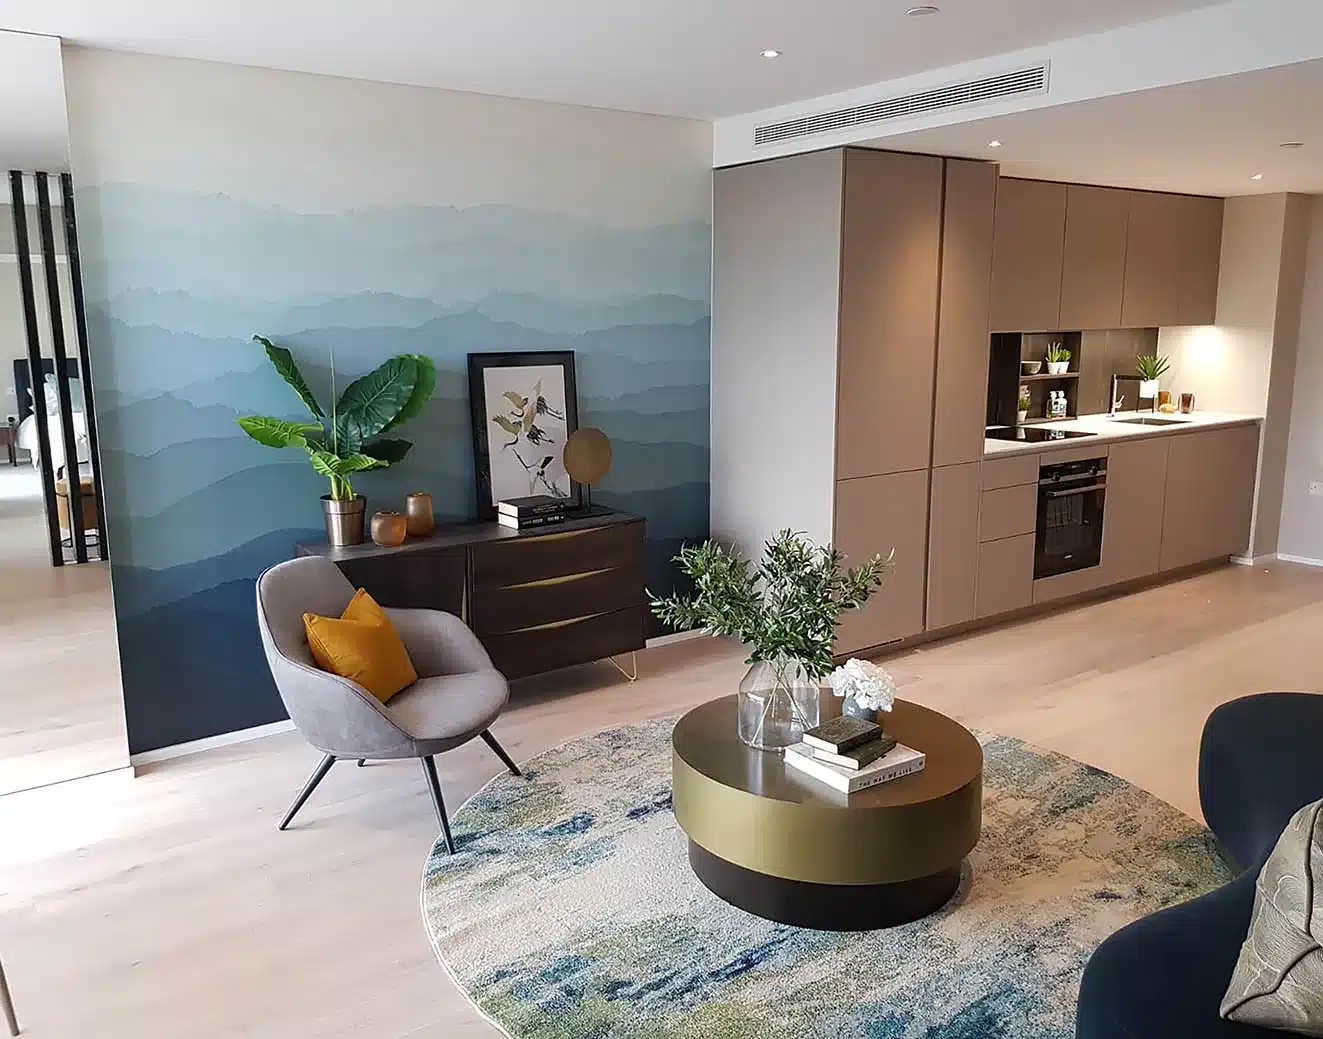 Wrey by zoffany wall mural installation in a show flat living room in London.